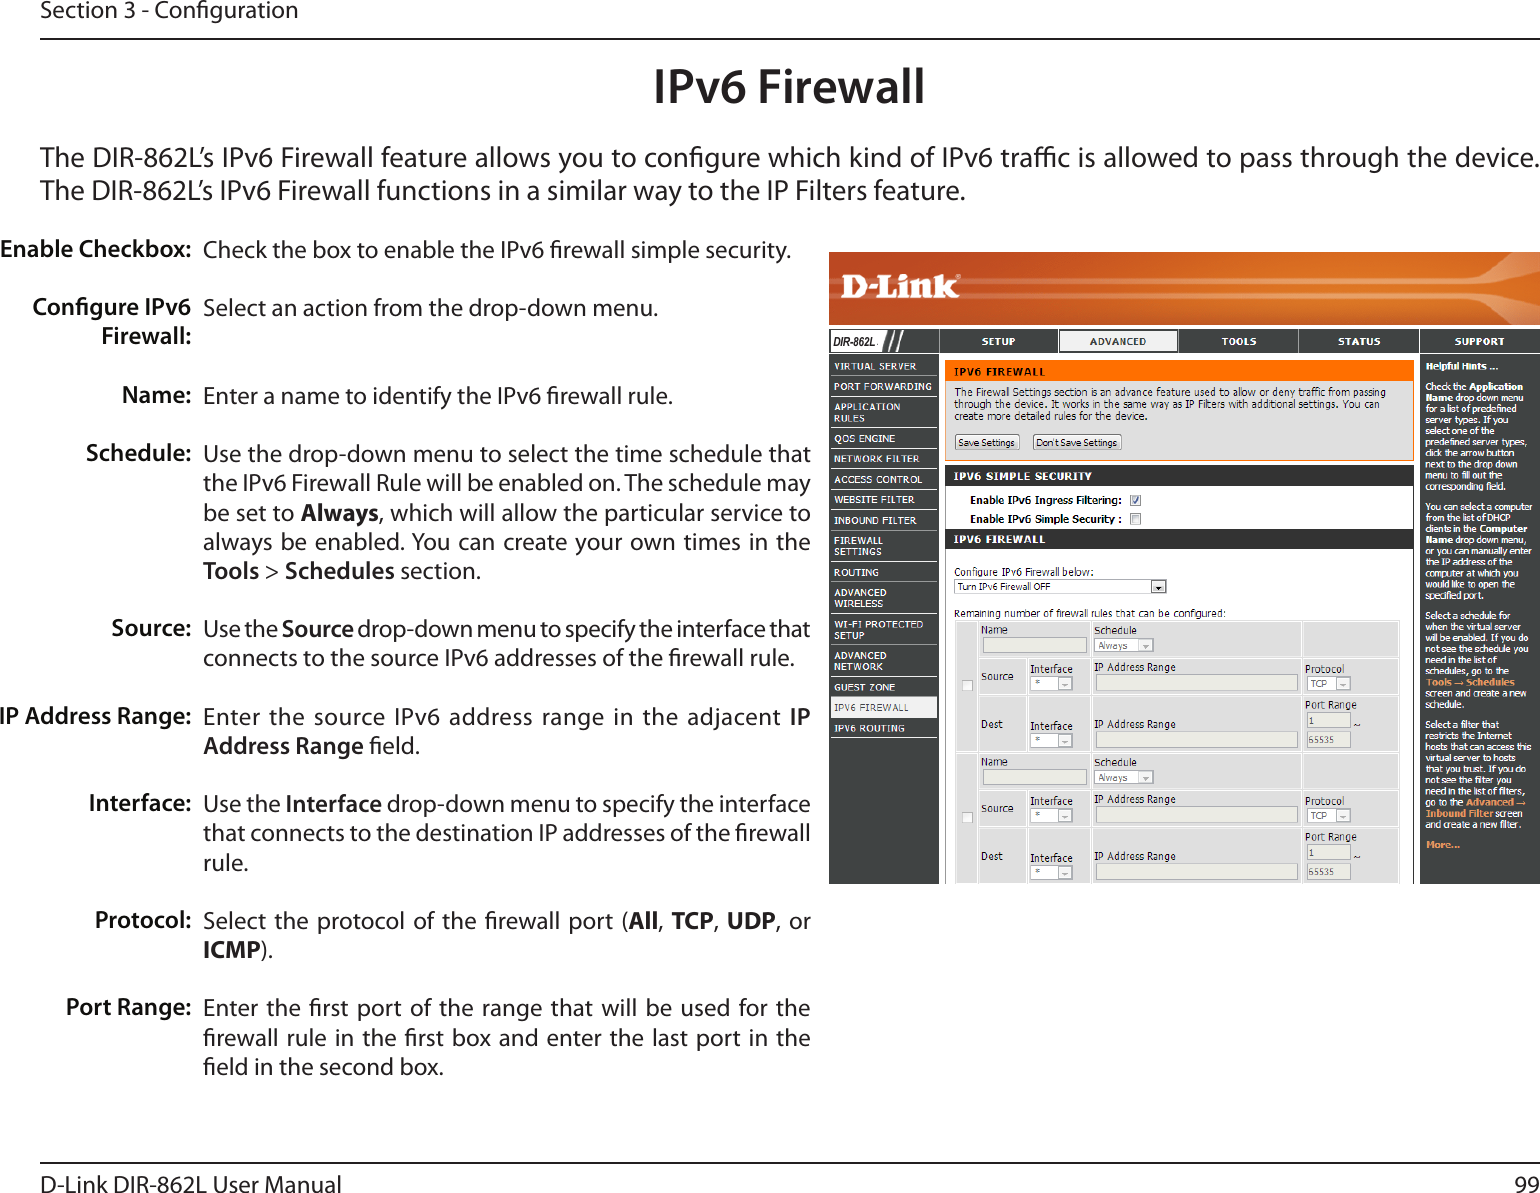 99D-Link DIR-862L User ManualSection 3 - CongurationIPv6 FirewallThe DIR-862L’s IPv6 Firewall feature allows you to congure which kind of IPv6 trac is allowed to pass through the device. The DIR-862L’s IPv6 Firewall functions in a similar way to the IP Filters feature.Check the box to enable the IPv6 rewall simple security.Select an action from the drop-down menu.Enter a name to identify the IPv6 rewall rule.Use the drop-down menu to select the time schedule that the IPv6 Firewall Rule will be enabled on. The schedule may be set to Always, which will allow the particular service to always be enabled. You can create your own times in the Tools &gt; Schedules section. Use the Source drop-down menu to specify the interface that connects to the source IPv6 addresses of the rewall rule. Enter the source IPv6 address range in the adjacent IP Address Range eld.Use the Interface drop-down menu to specify the interface that connects to the destination IP addresses of the rewall rule. Select the protocol of the rewall port (All,  TCP, UDP, or ICMP).Enter the rst port of the range that will be used for the rewall rule in the rst box and enter the last port in the eld in the second box.Enable Checkbox:Congure IPv6 Firewall:Name:Schedule:Source:IP Address Range:Interface:   Protocol:Port Range:DIR-862L